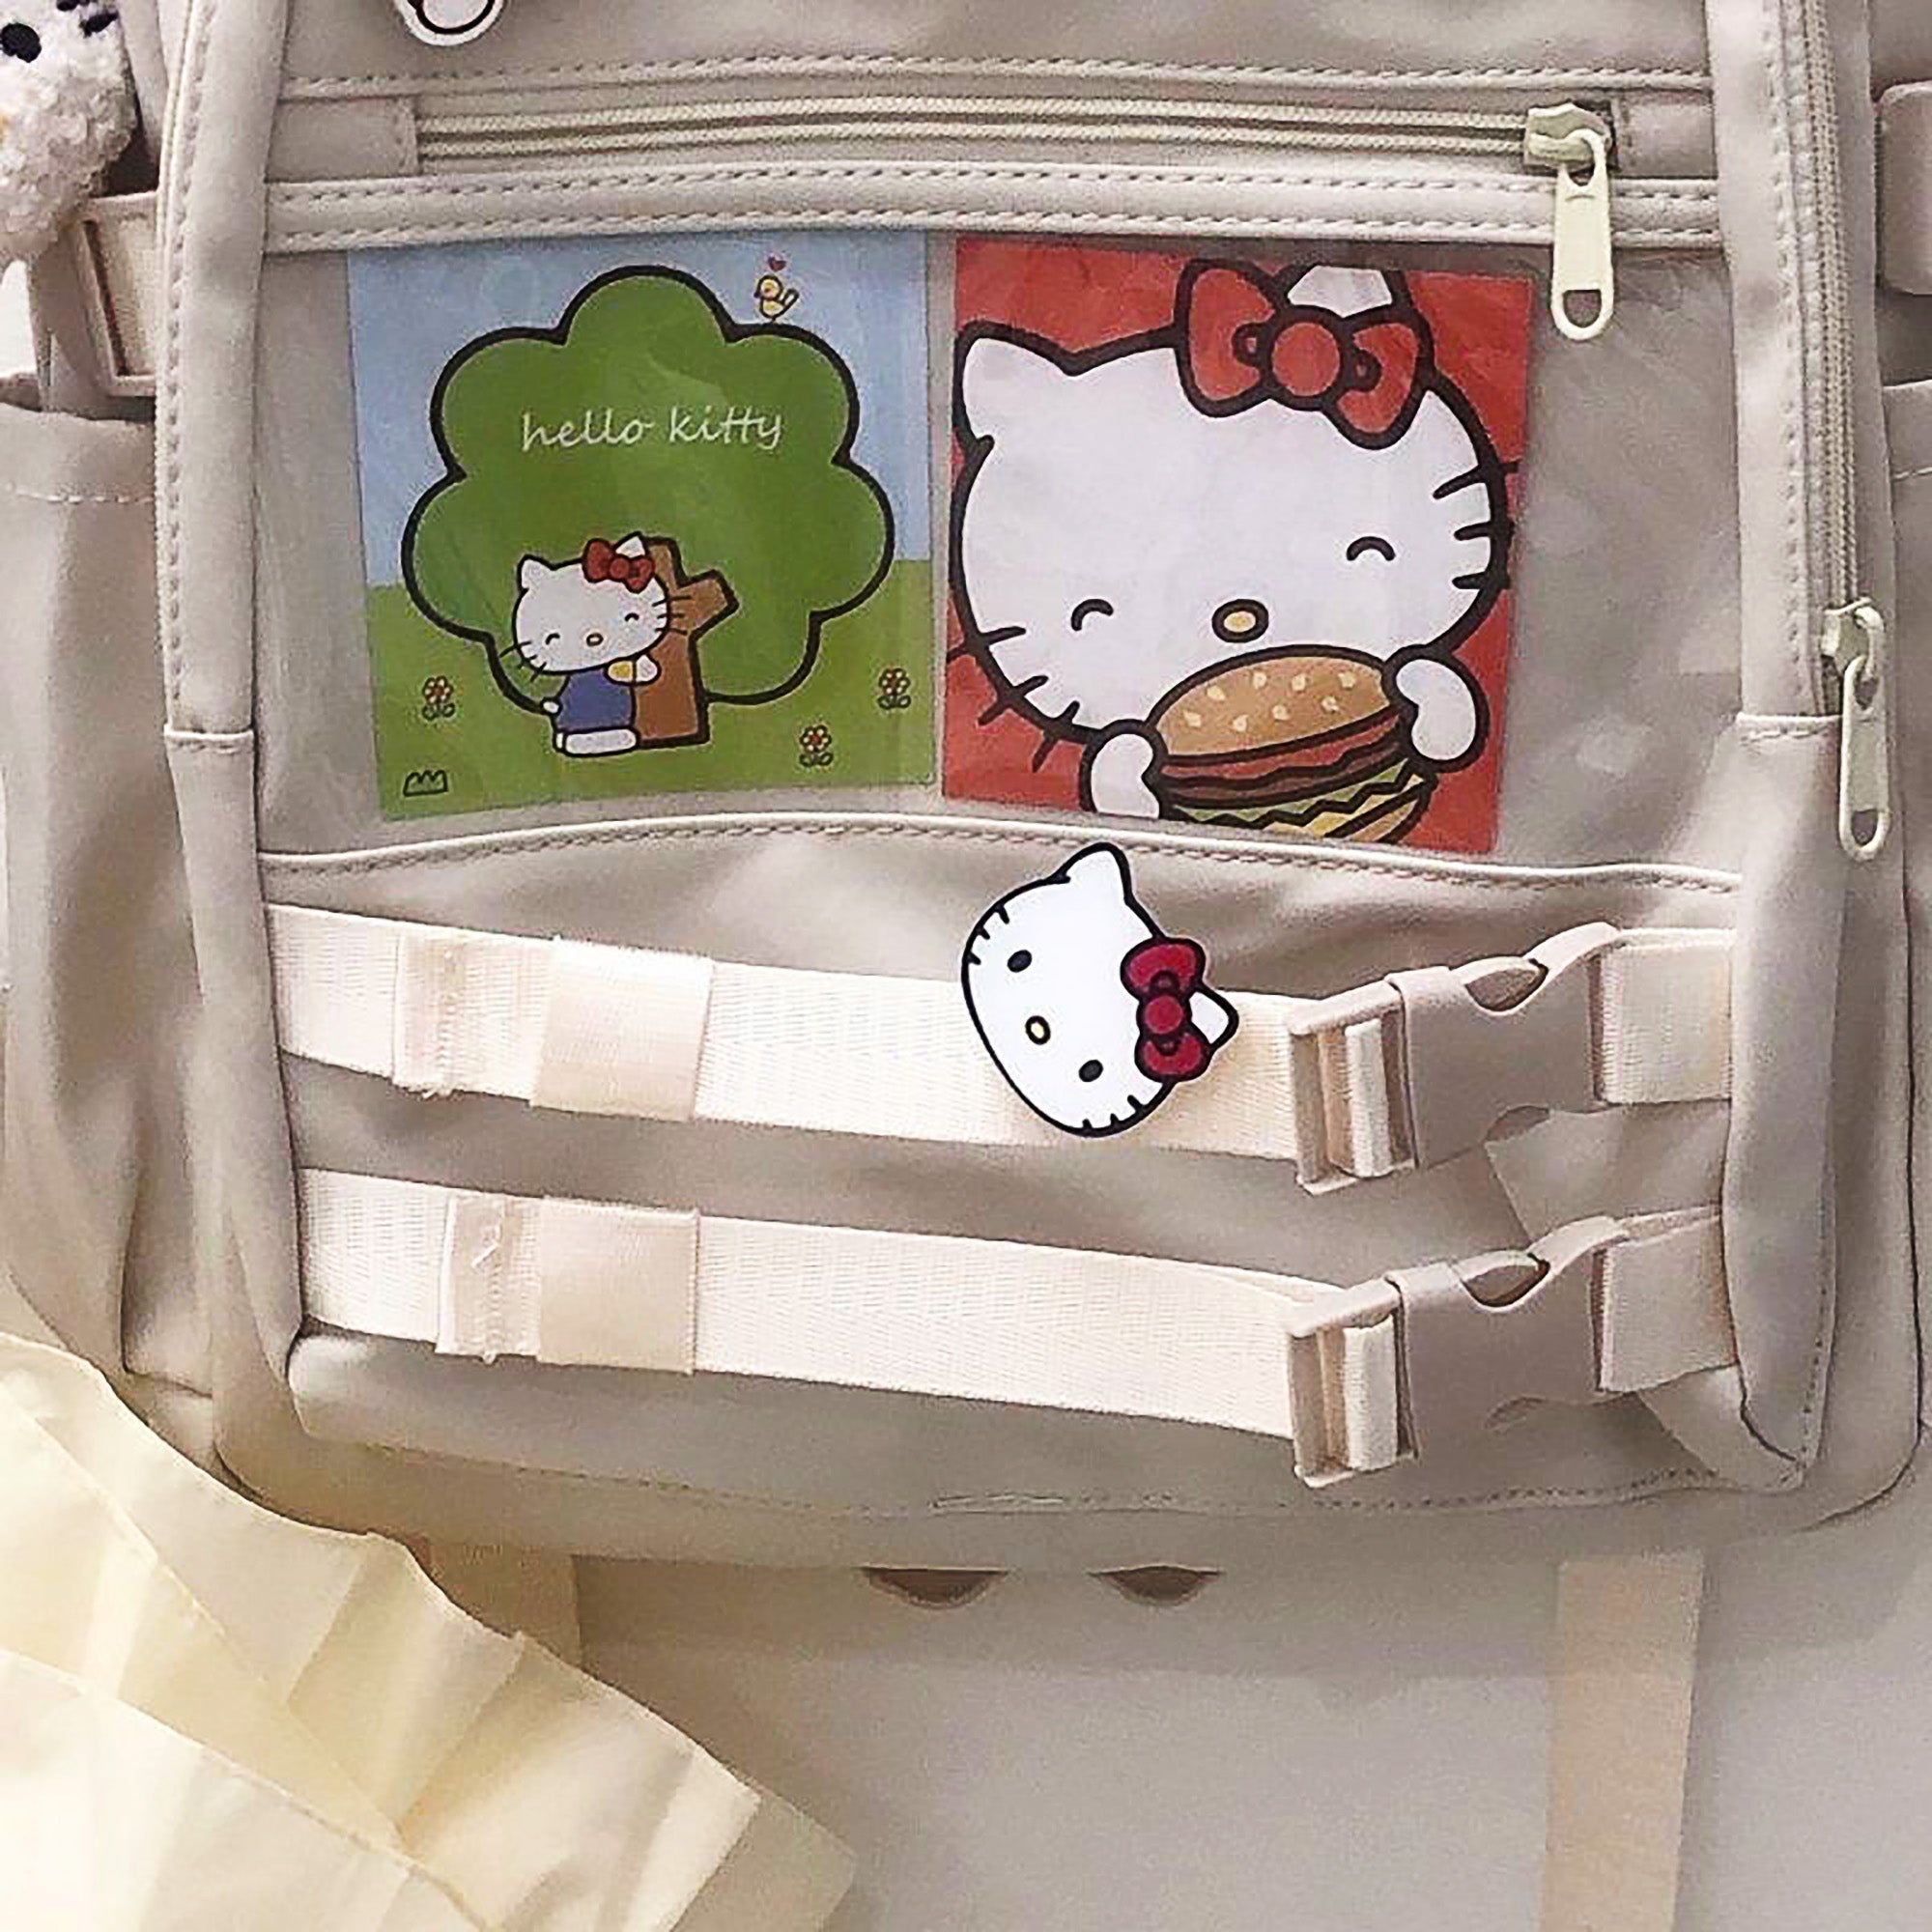 Adorable Hello Kitty Schoolbag - Perfect For Primary School Students Girls!